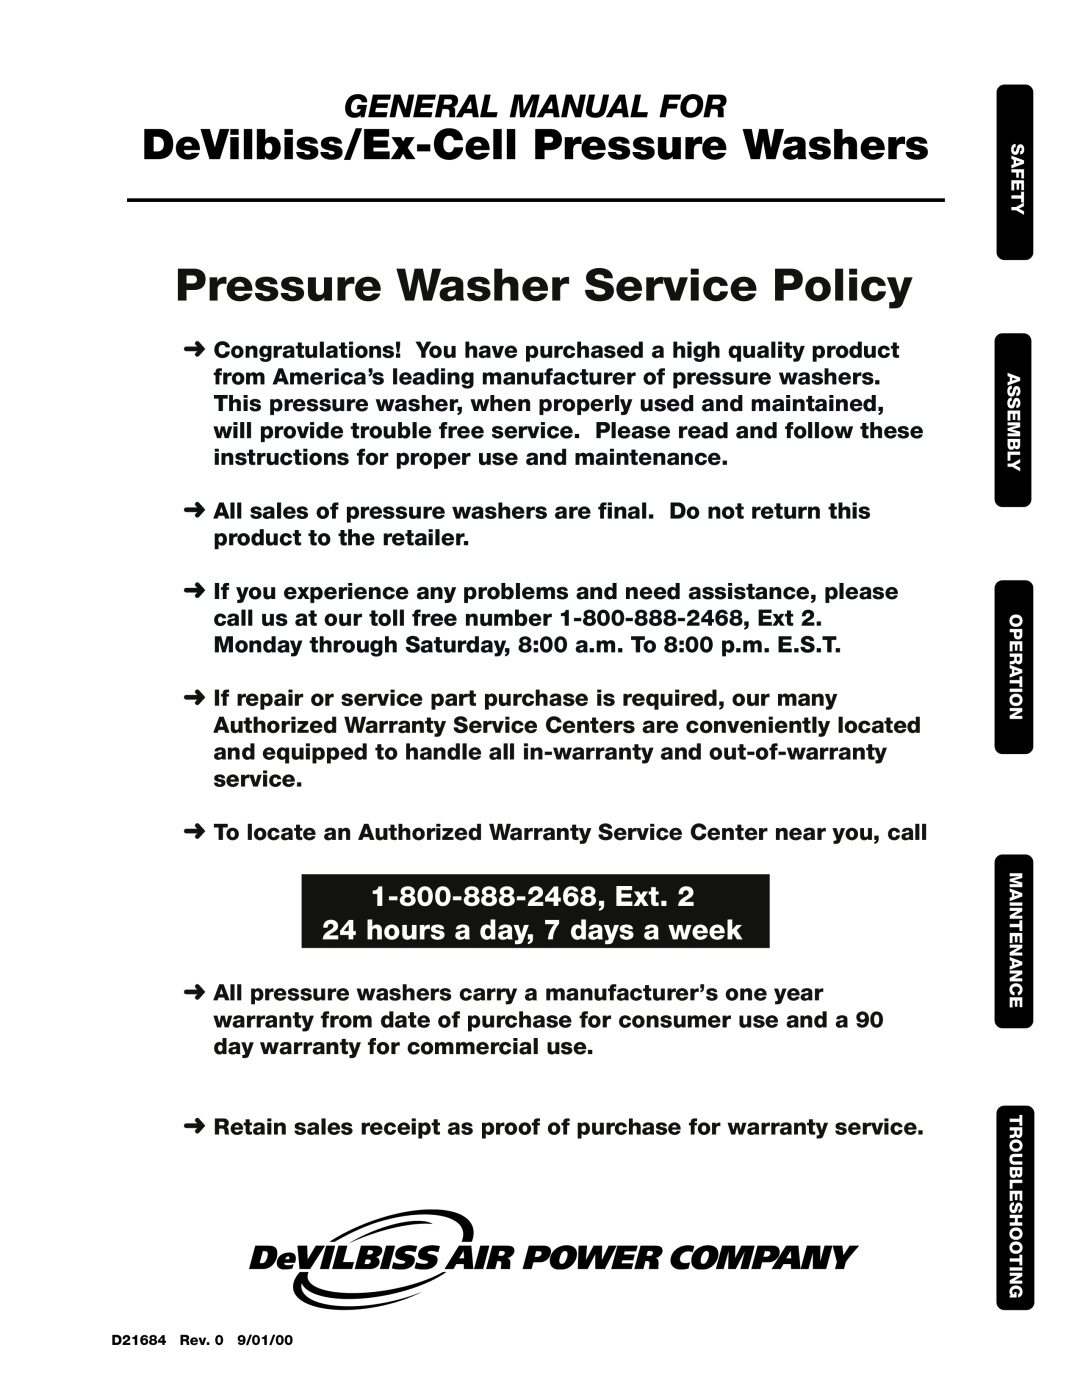 DeVillbiss Air Power Company D21684 warranty Pressure Washer Service Policy, DeVilbiss/Ex-Cell Pressure Washers 